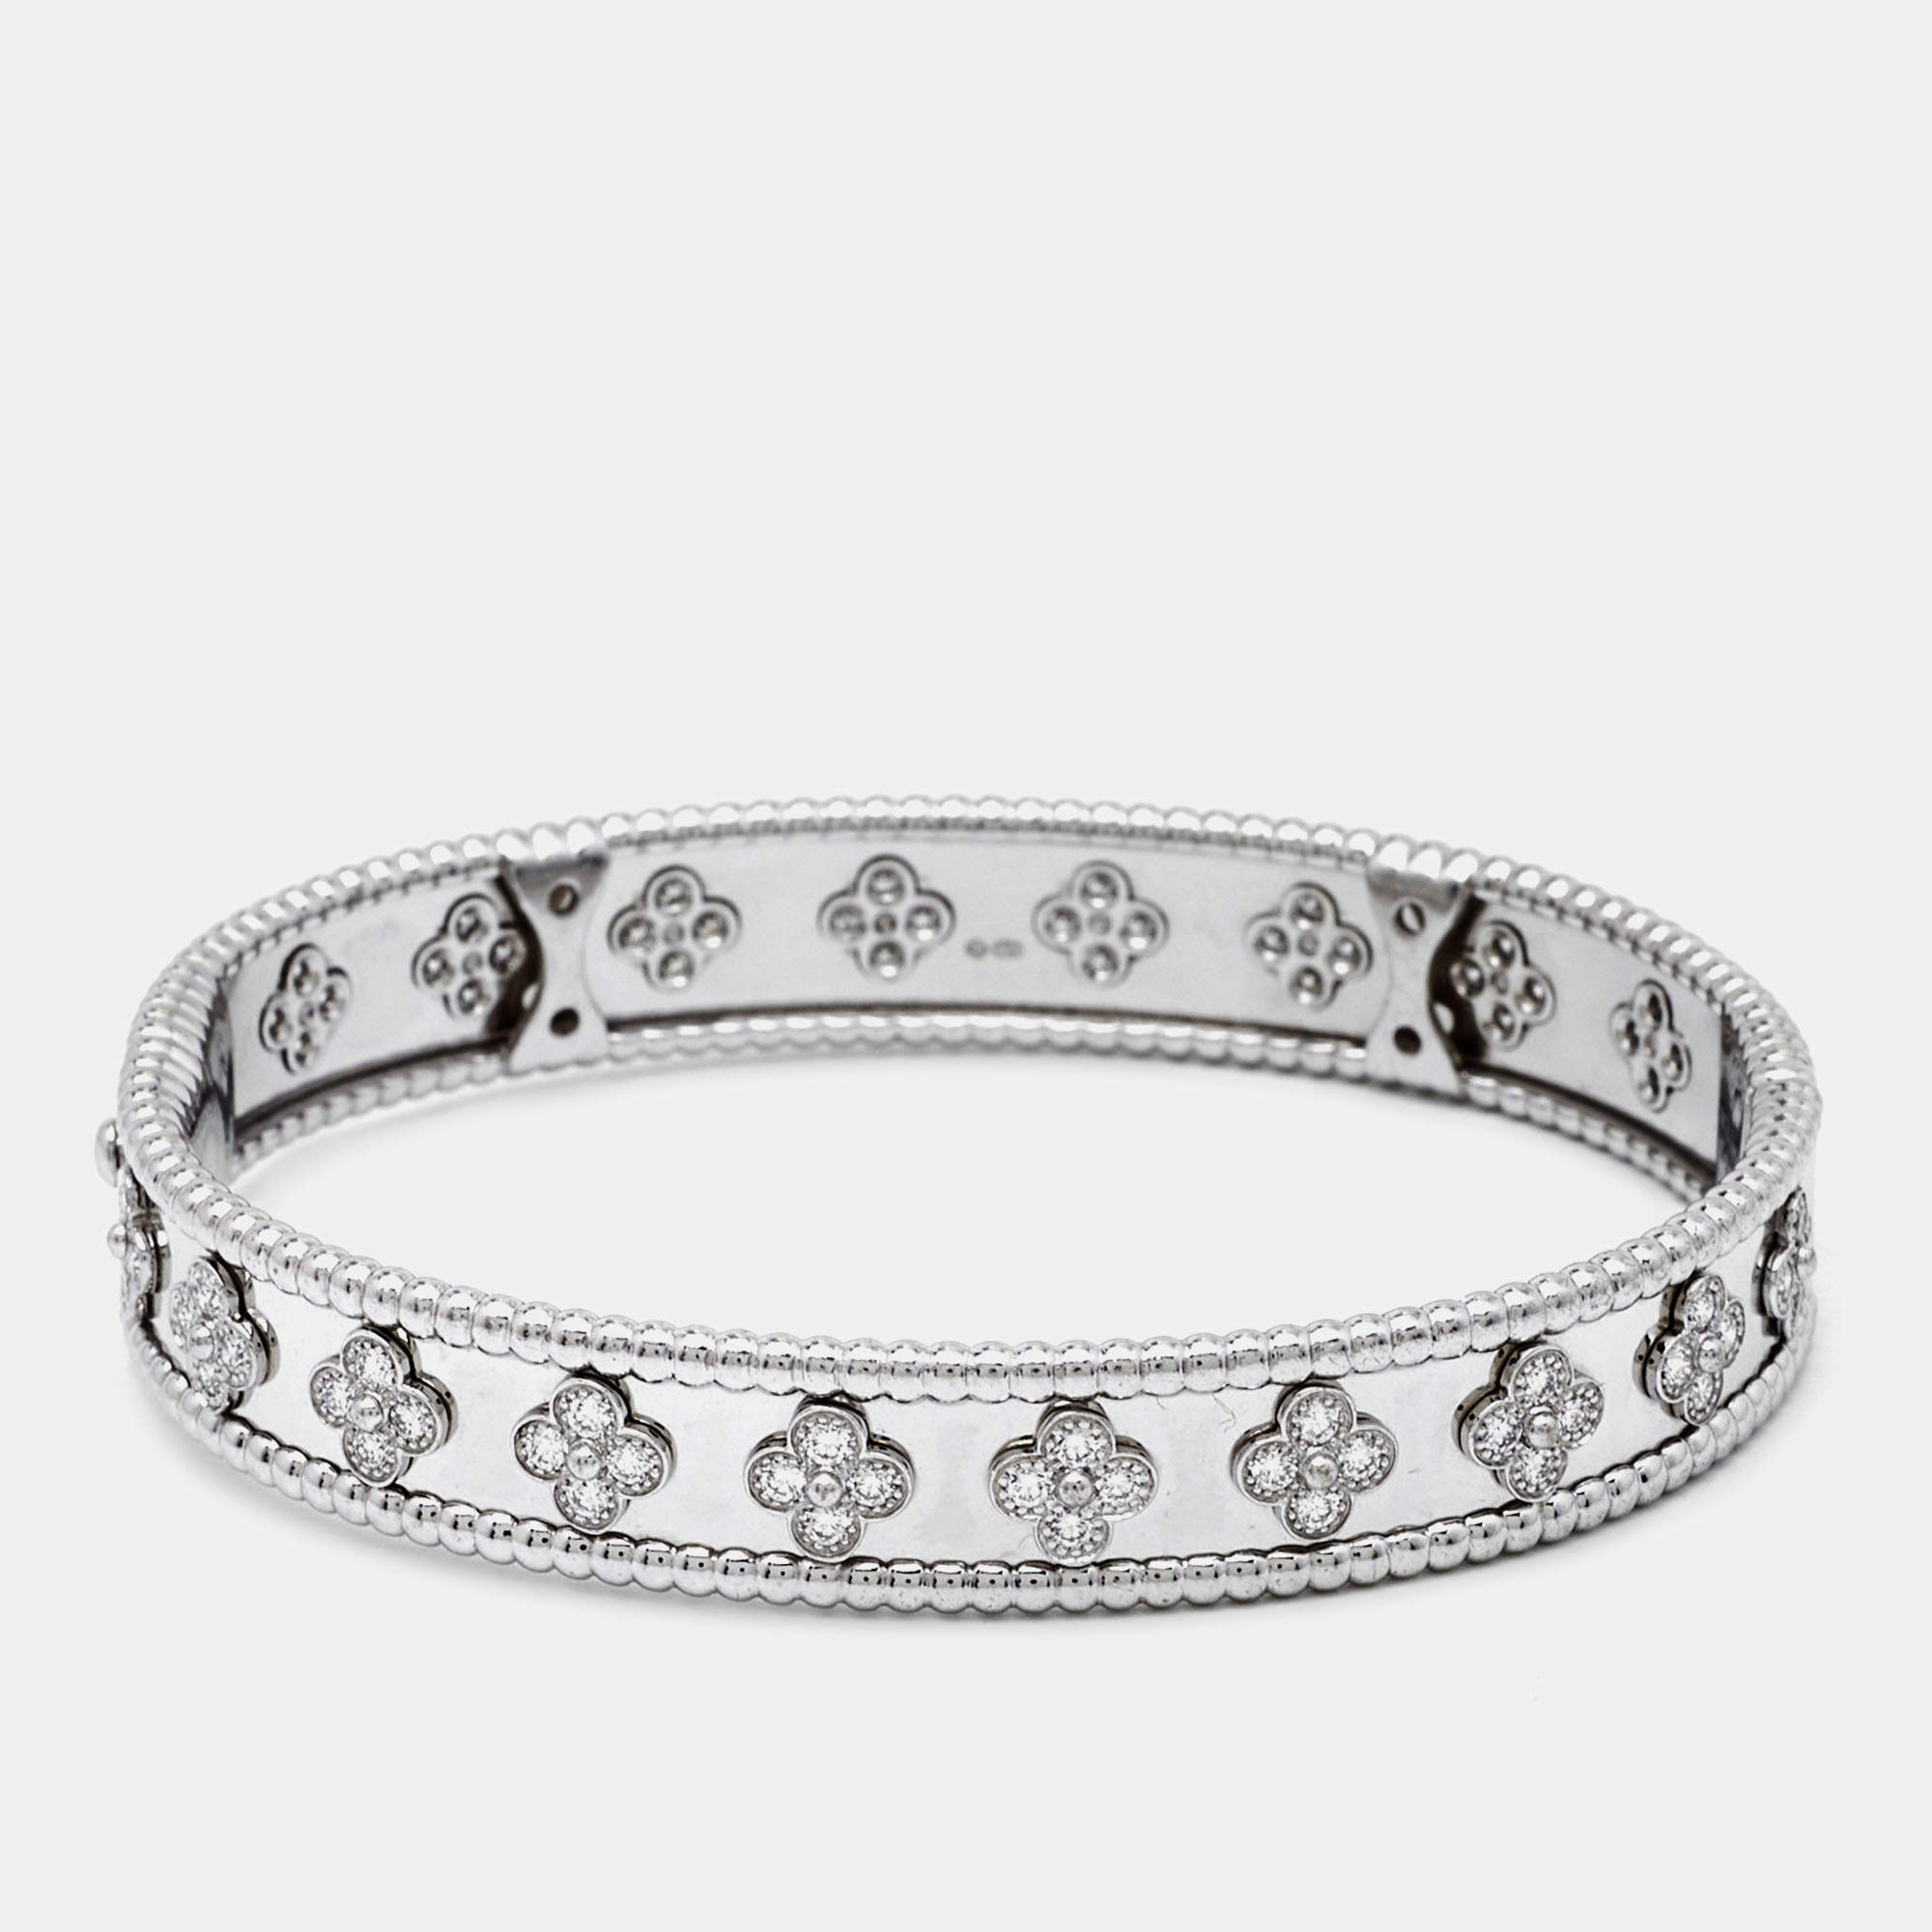 NOVICA Artisan Handmade .925 Sterling Silver Bracelet No Stone Chain  Indonesia 'Bell Charm': Clothing, Shoes & Jewelry - Amazon.com